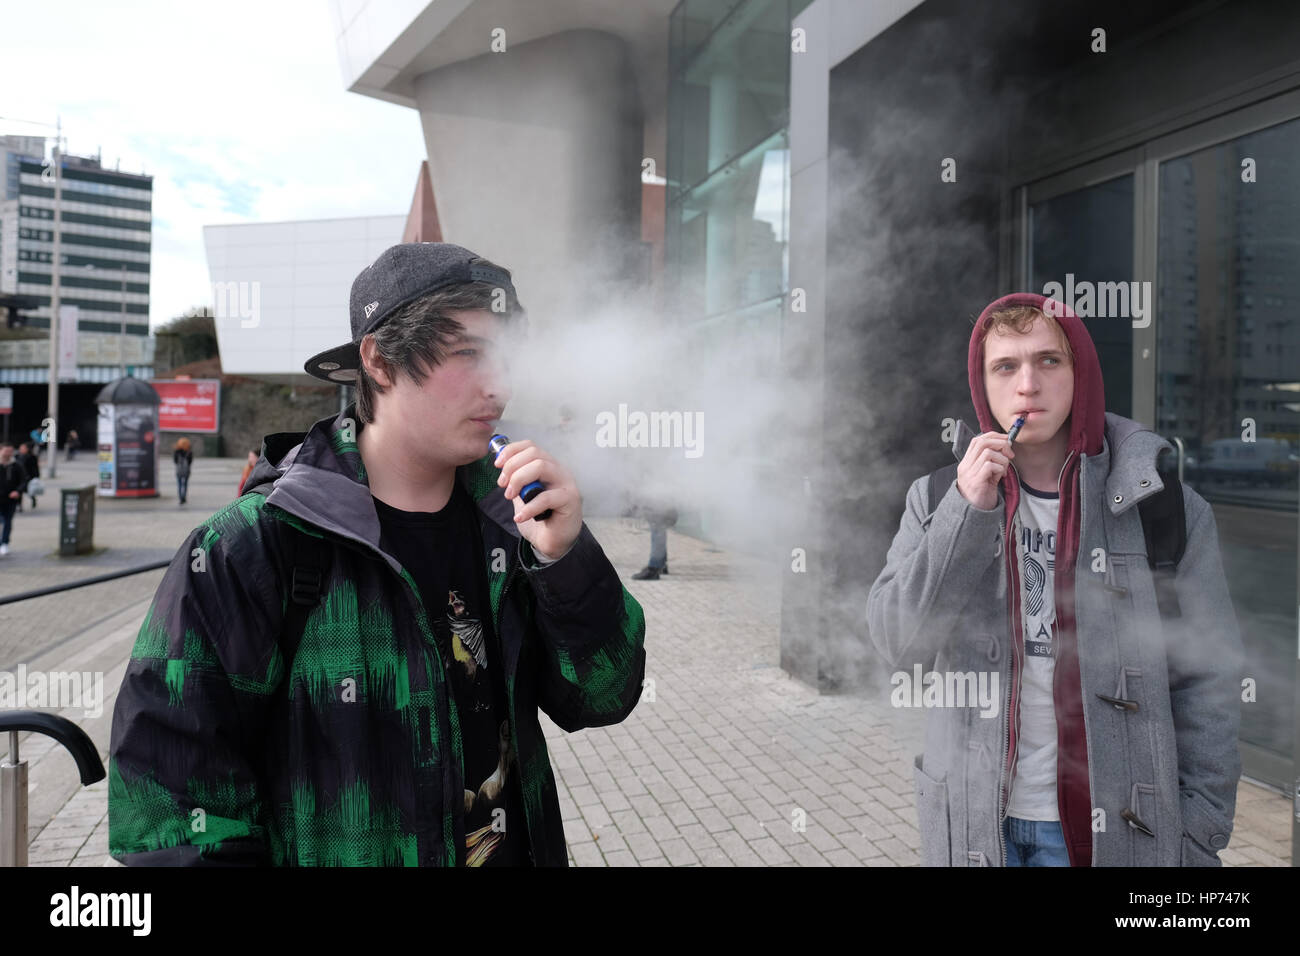 Carrie Edwards (left) 22 of age and Andrew Shaw (right) (22), USW Music Industry students, smoke e-cigarette during a break outside Atrium USW Stock Photo